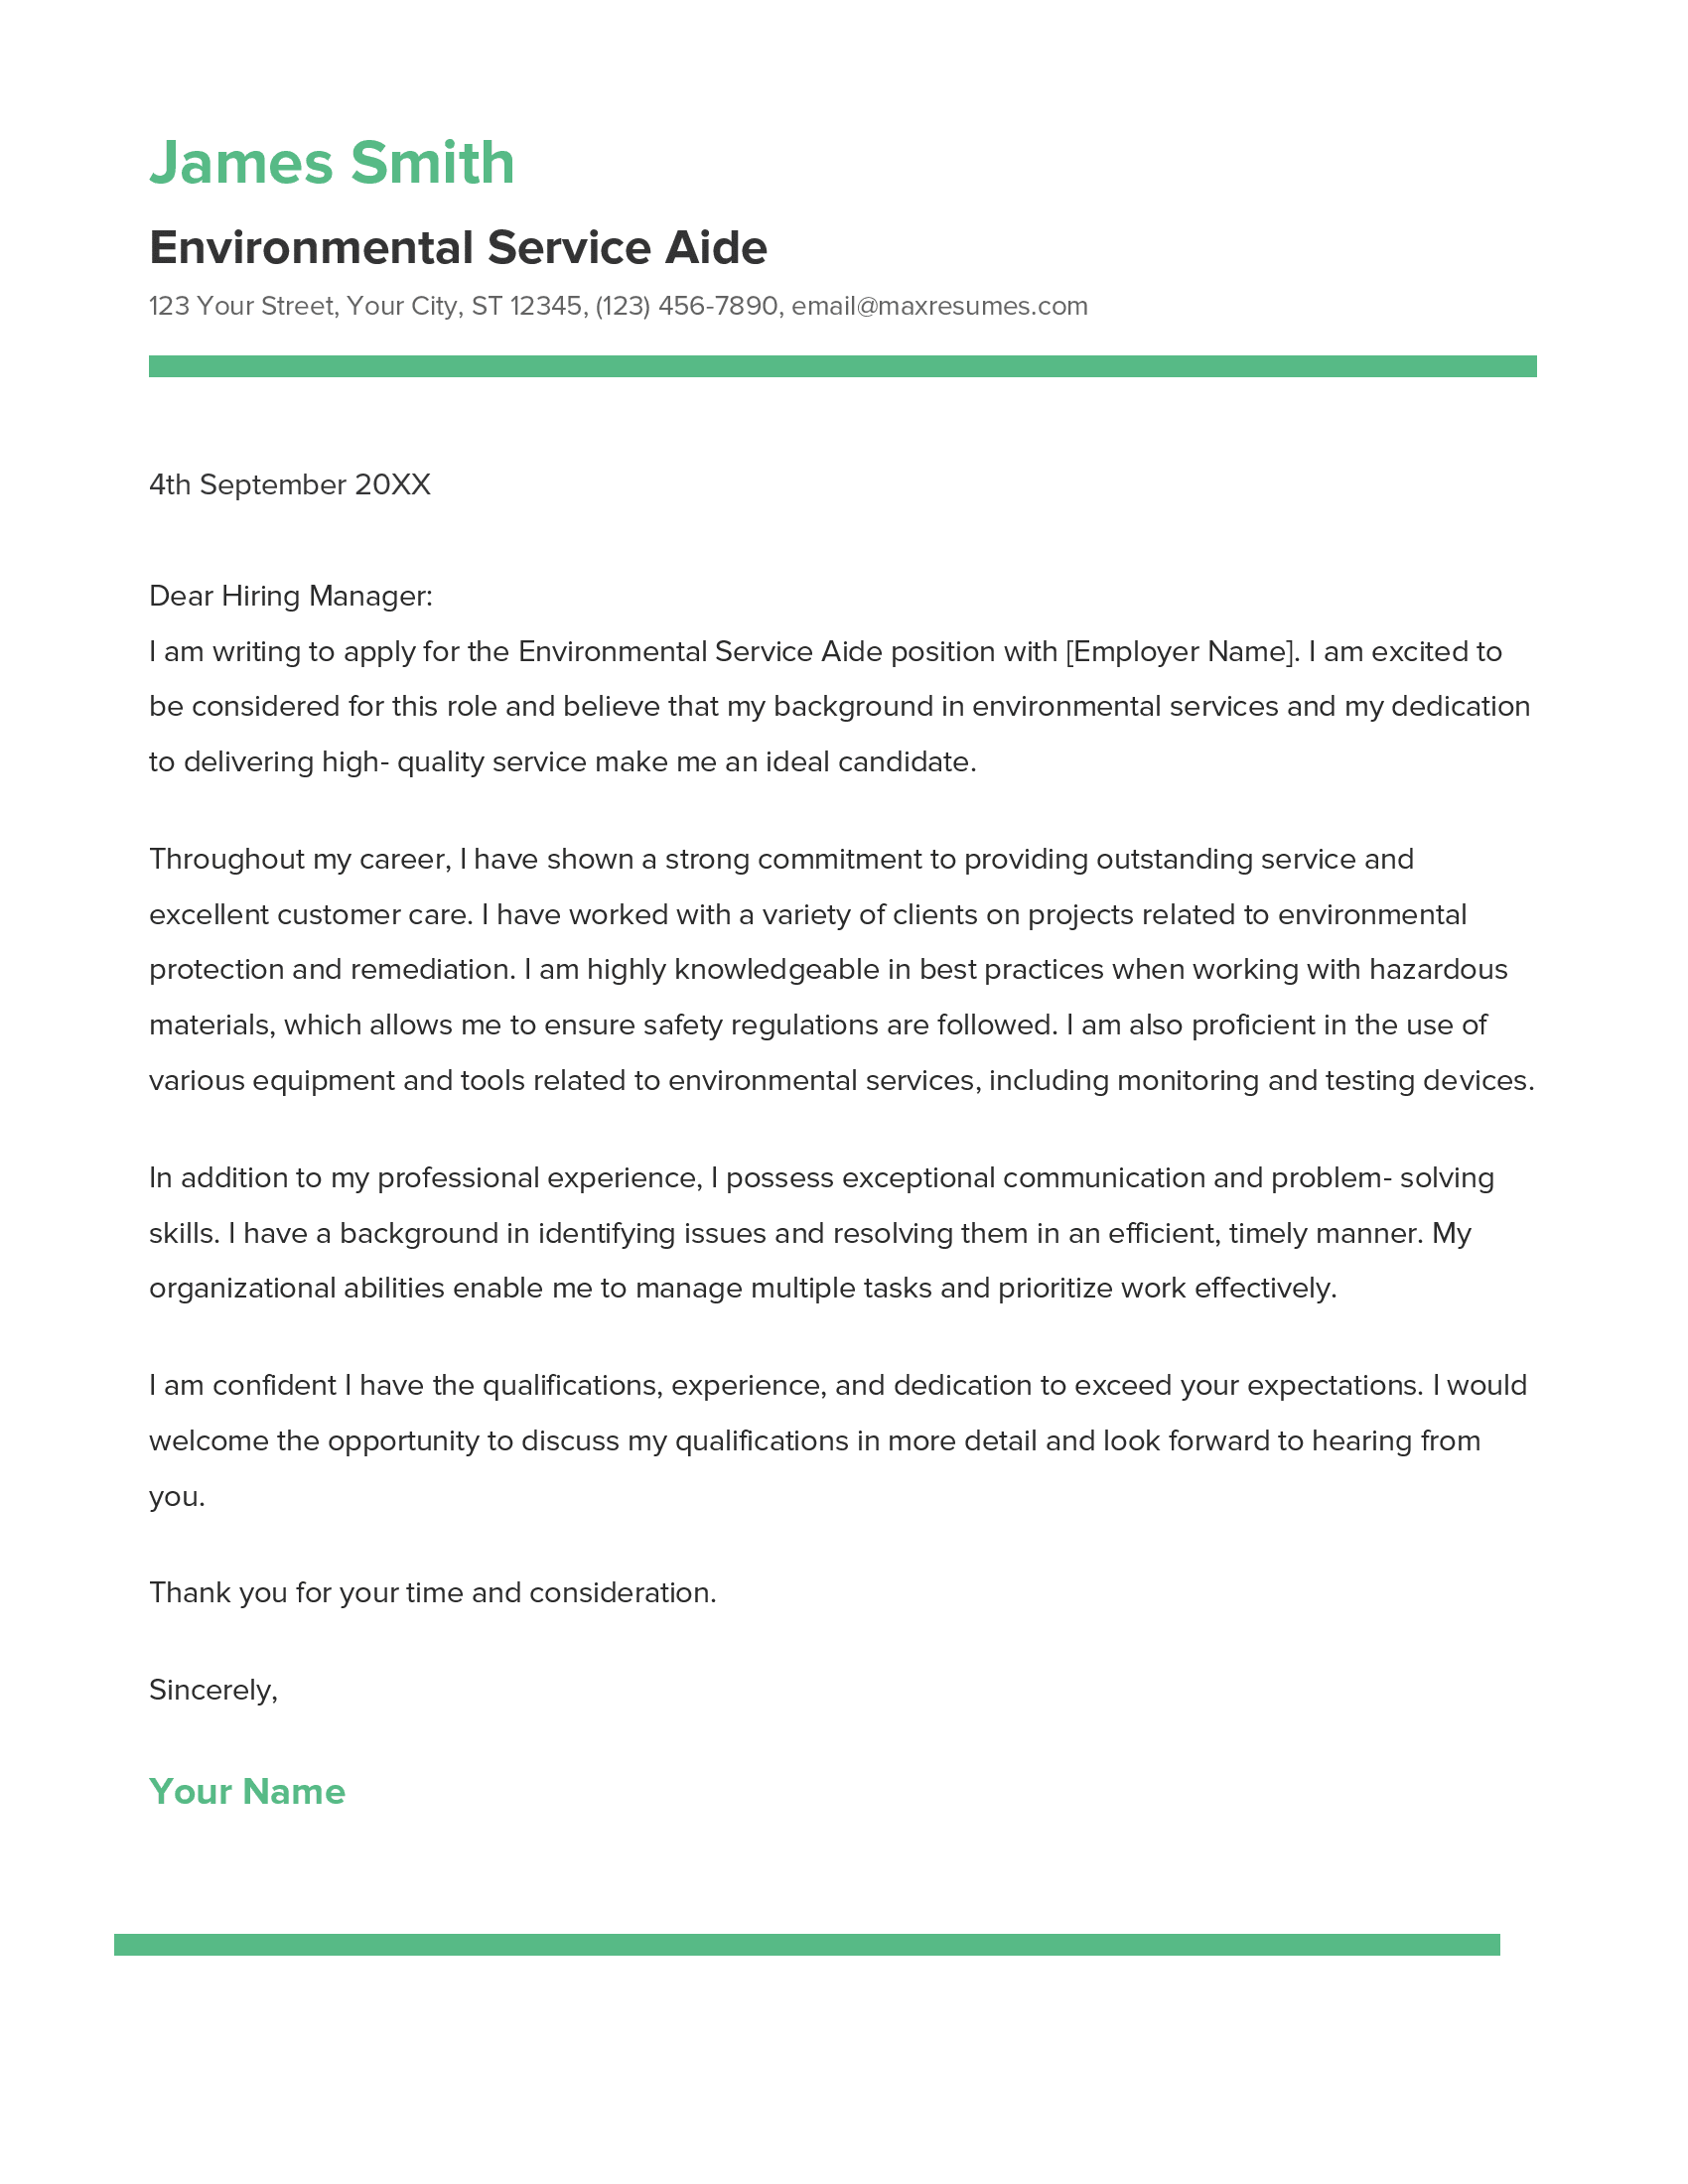 Environmental Service Aide Cover Letter Example